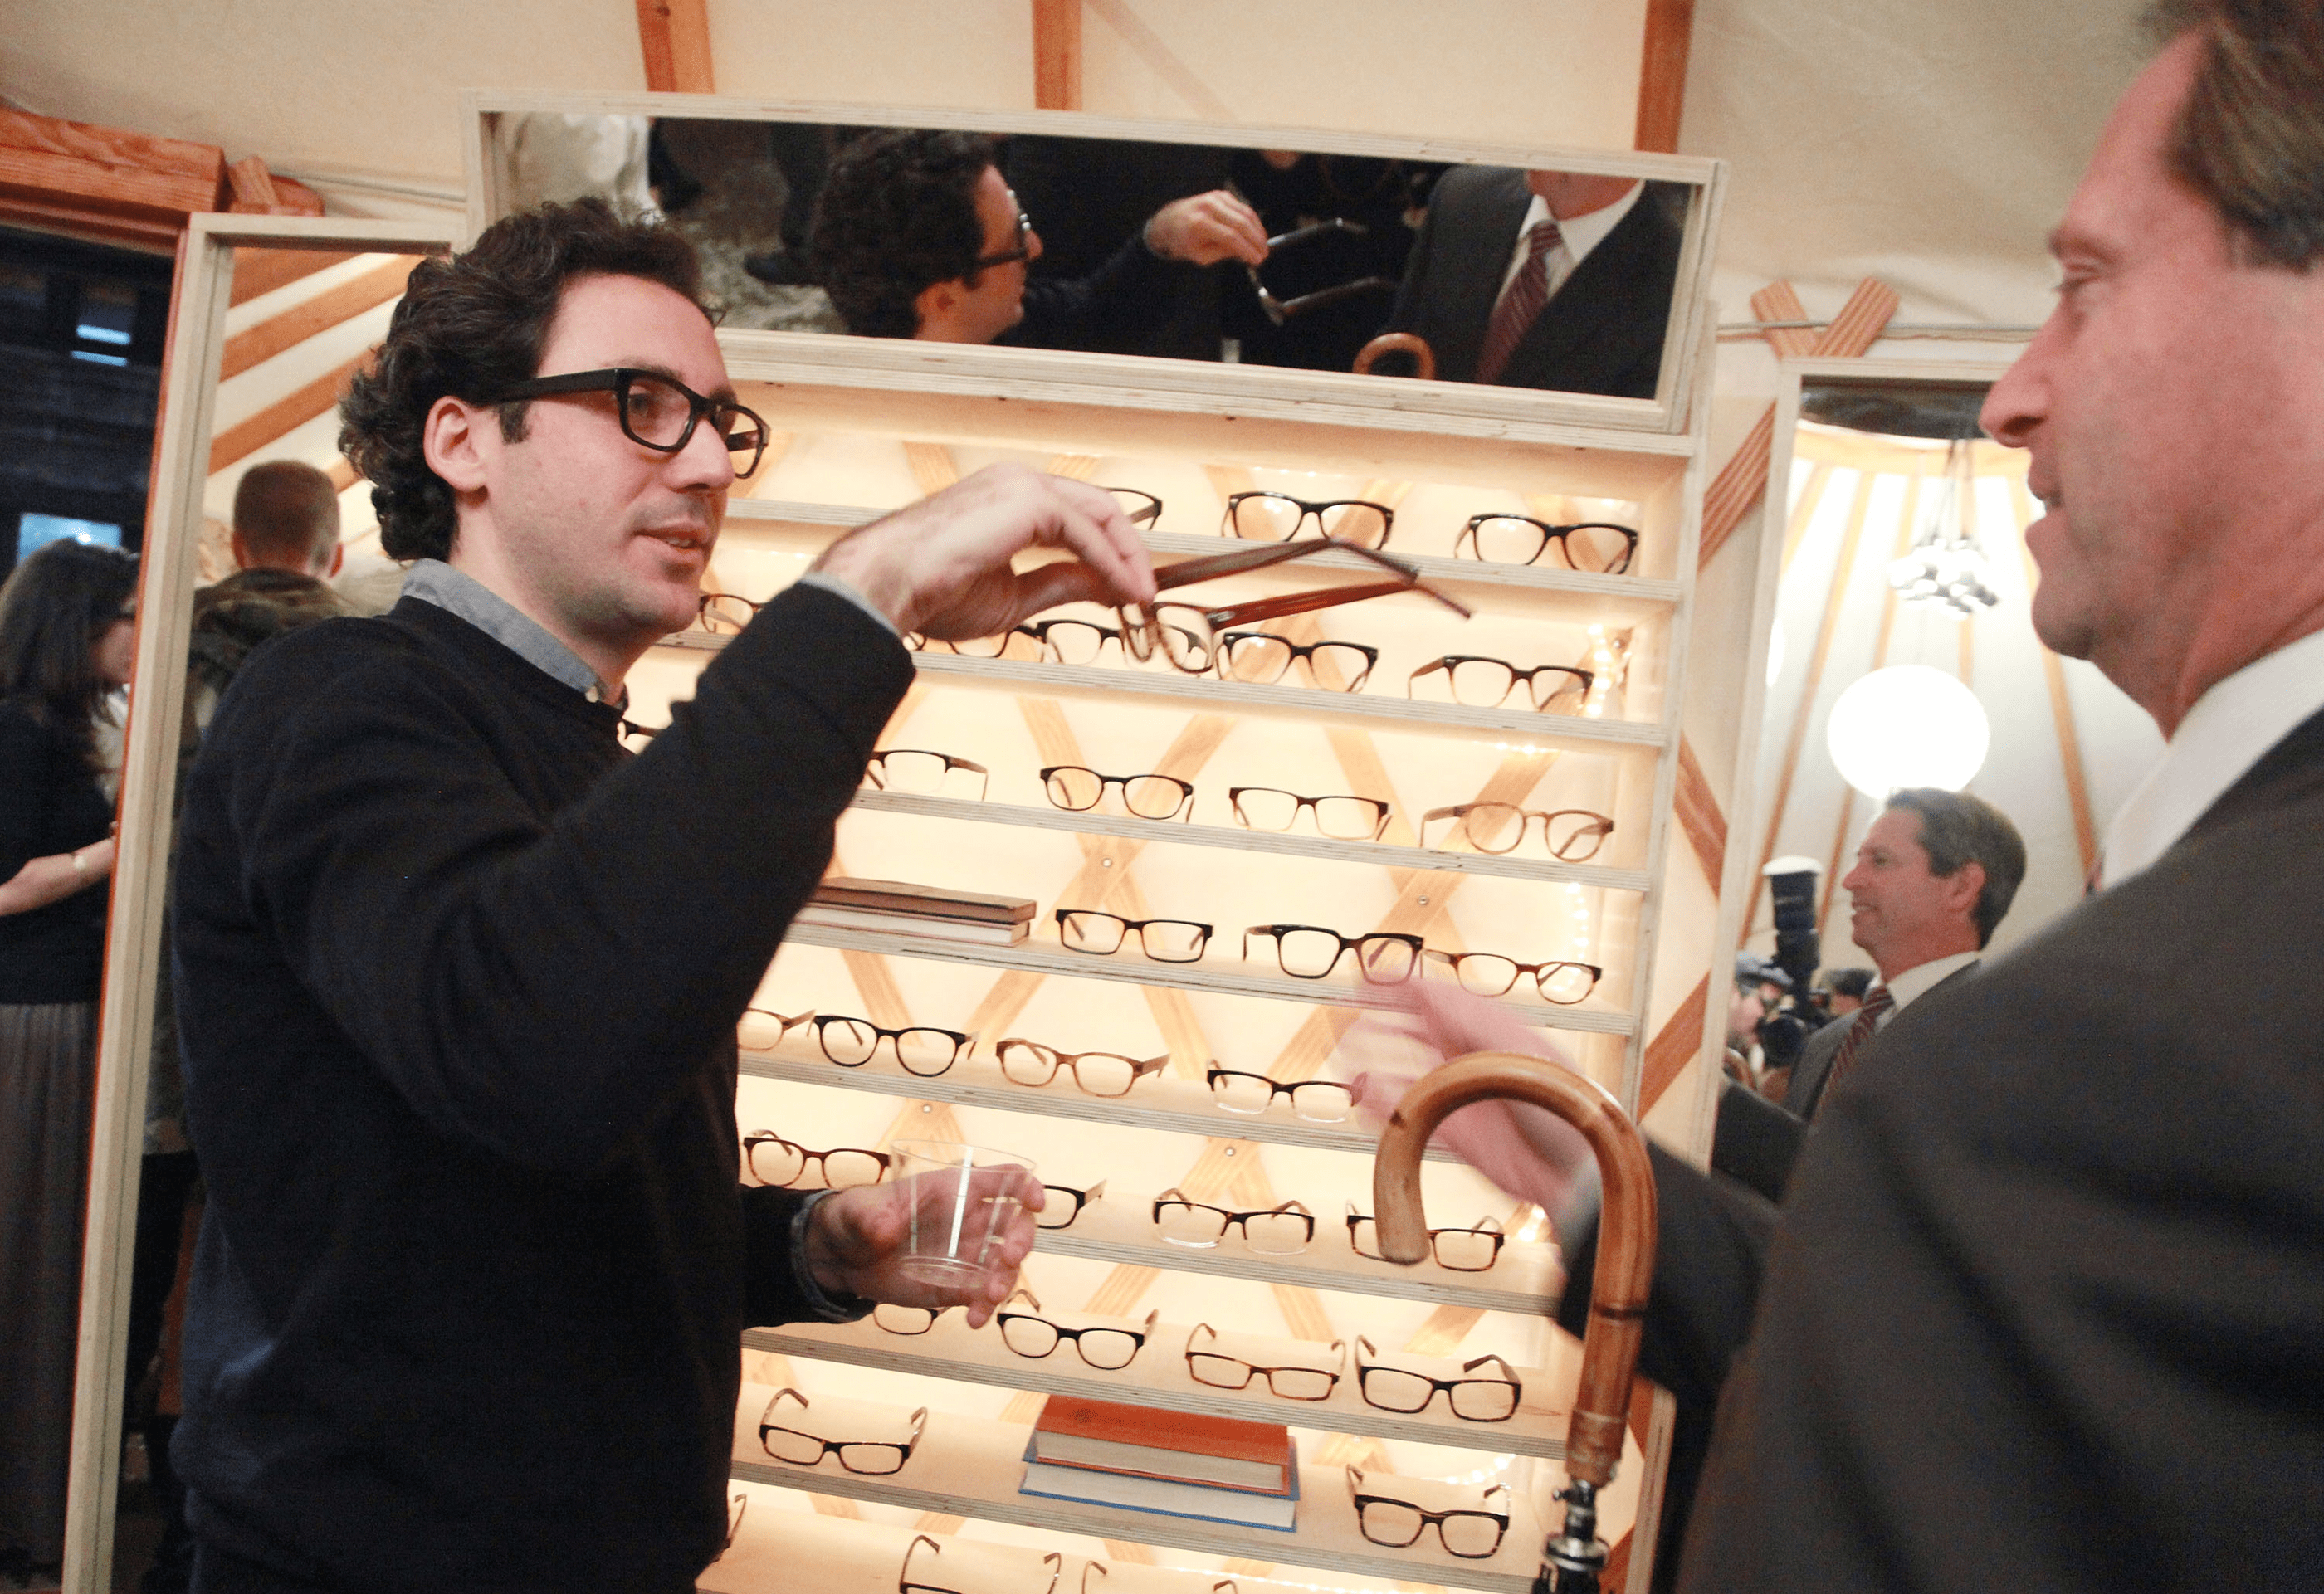 Neil Blumenthal shows Warby Parker optical frames at the Warby Parker's holiday spectacle bazaar - leftover launch on November 29, 2011 in New York City.